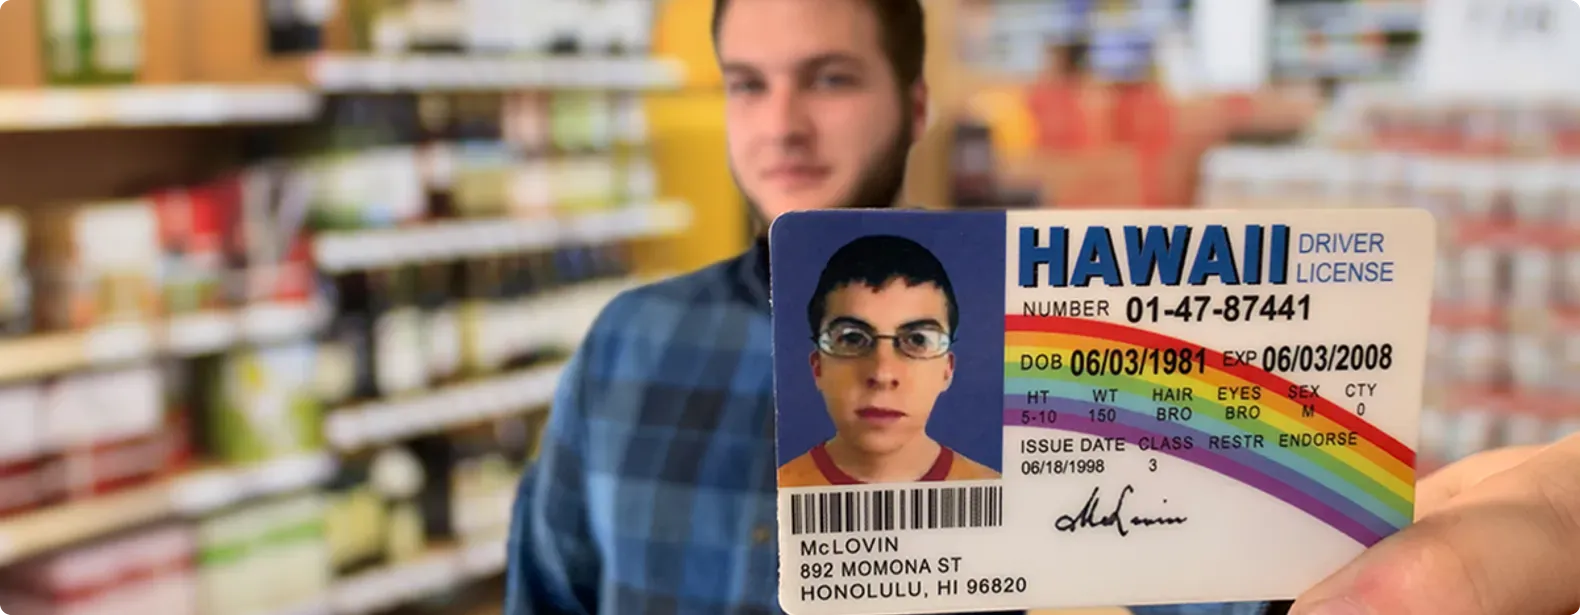 FAKE IDs: Technology fooling even the most trained eye